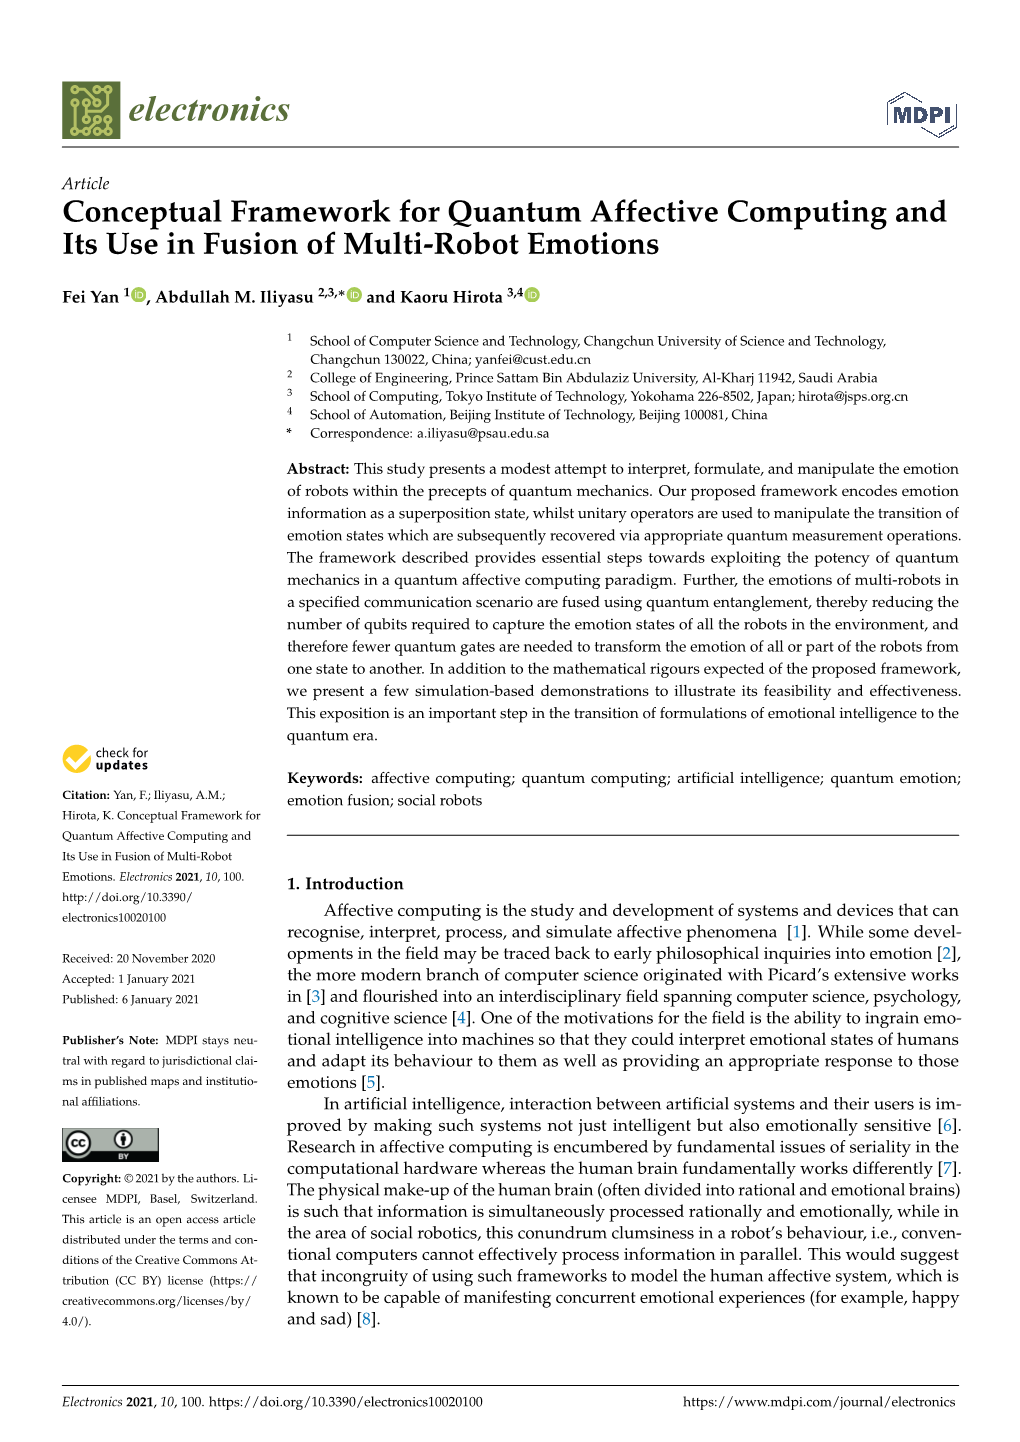 Conceptual Framework for Quantum Affective Computing and Its Use in Fusion of Multi-Robot Emotions